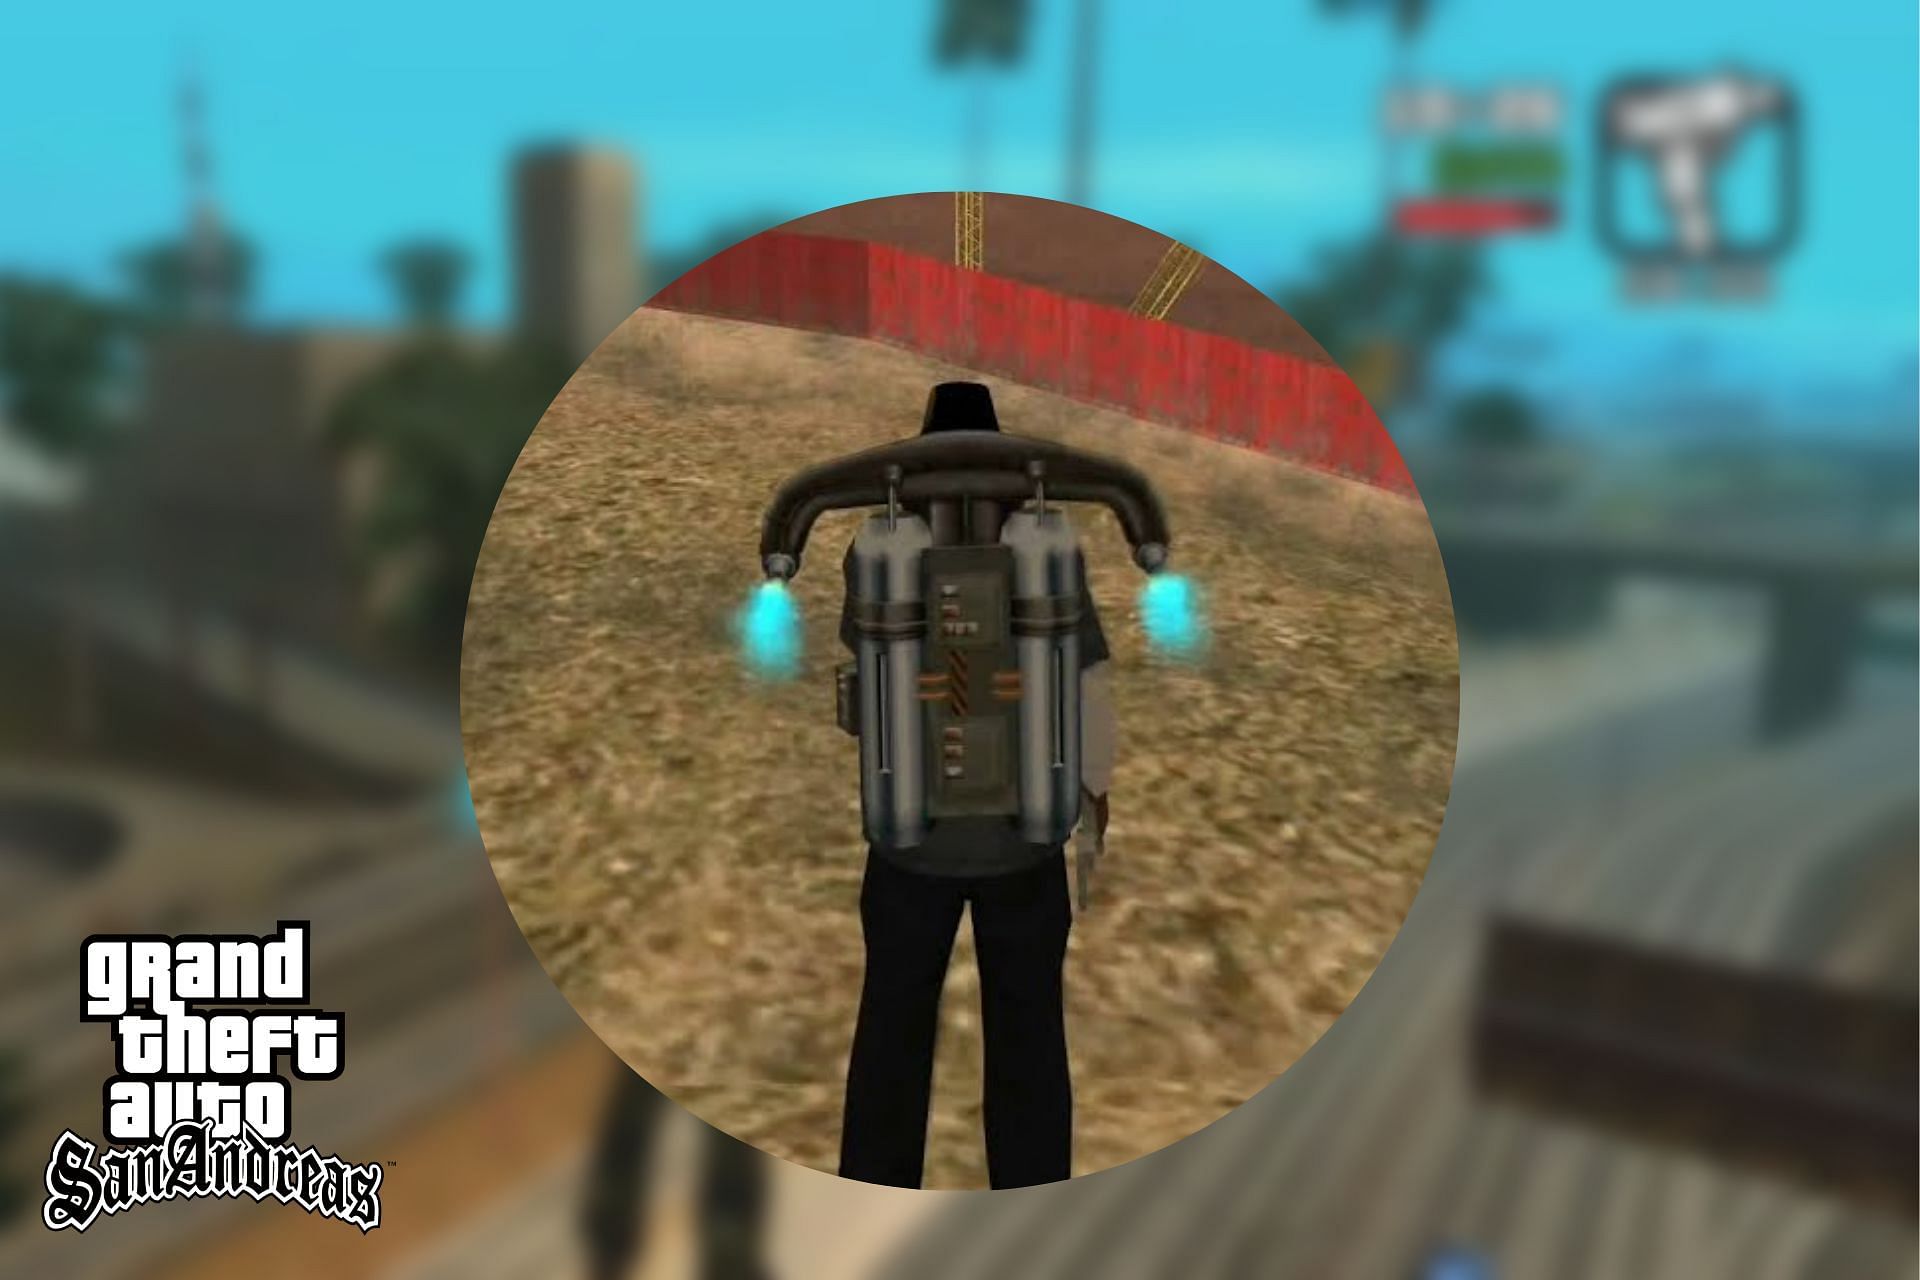 5 of the most useful cheat codes for missions in GTA San Andreas